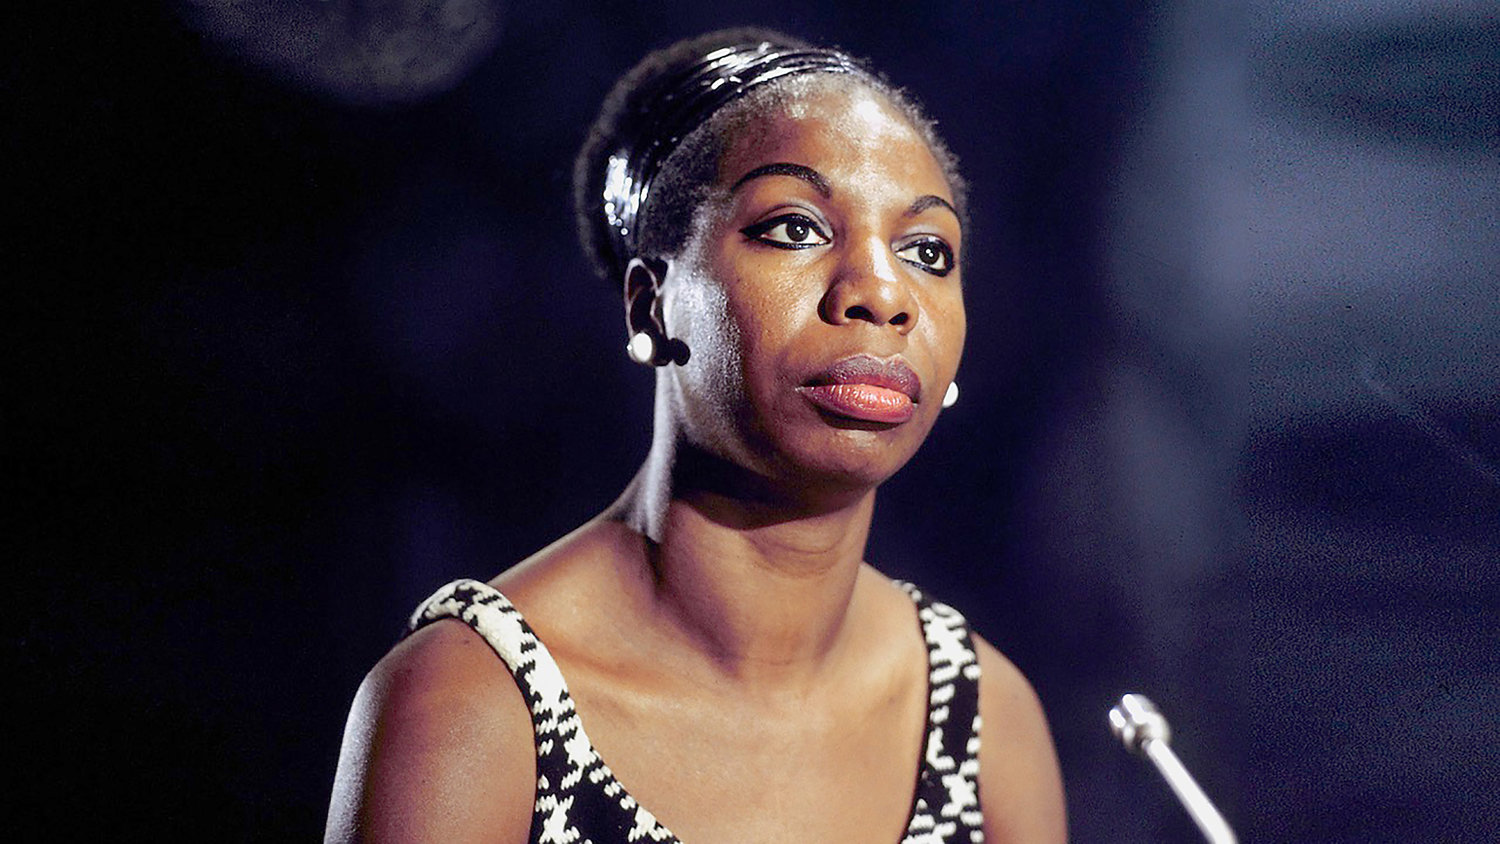 The “Nina Simone: The Lost Album” movie tells the tale of several songs written by a Little Falls resident but never recorded before the jazz singer passed away. There is a film screening at 6 p.m. Saturday, March 18 at Rock City Centre in Little Falls.